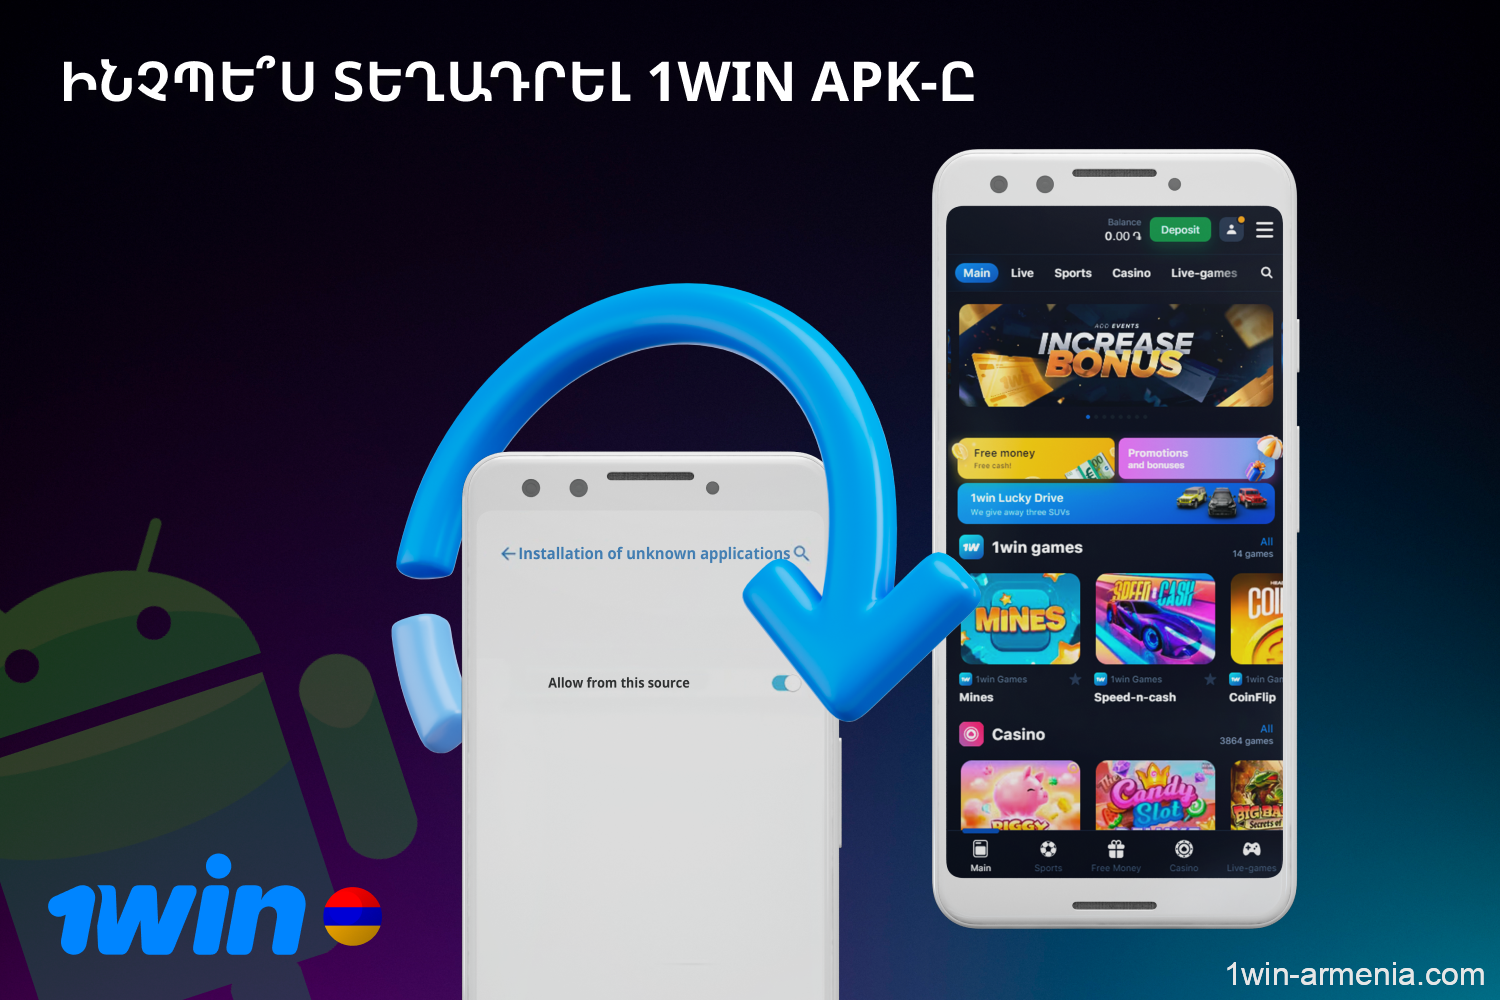 Installing 1win Apk for Android takes just a few clicks